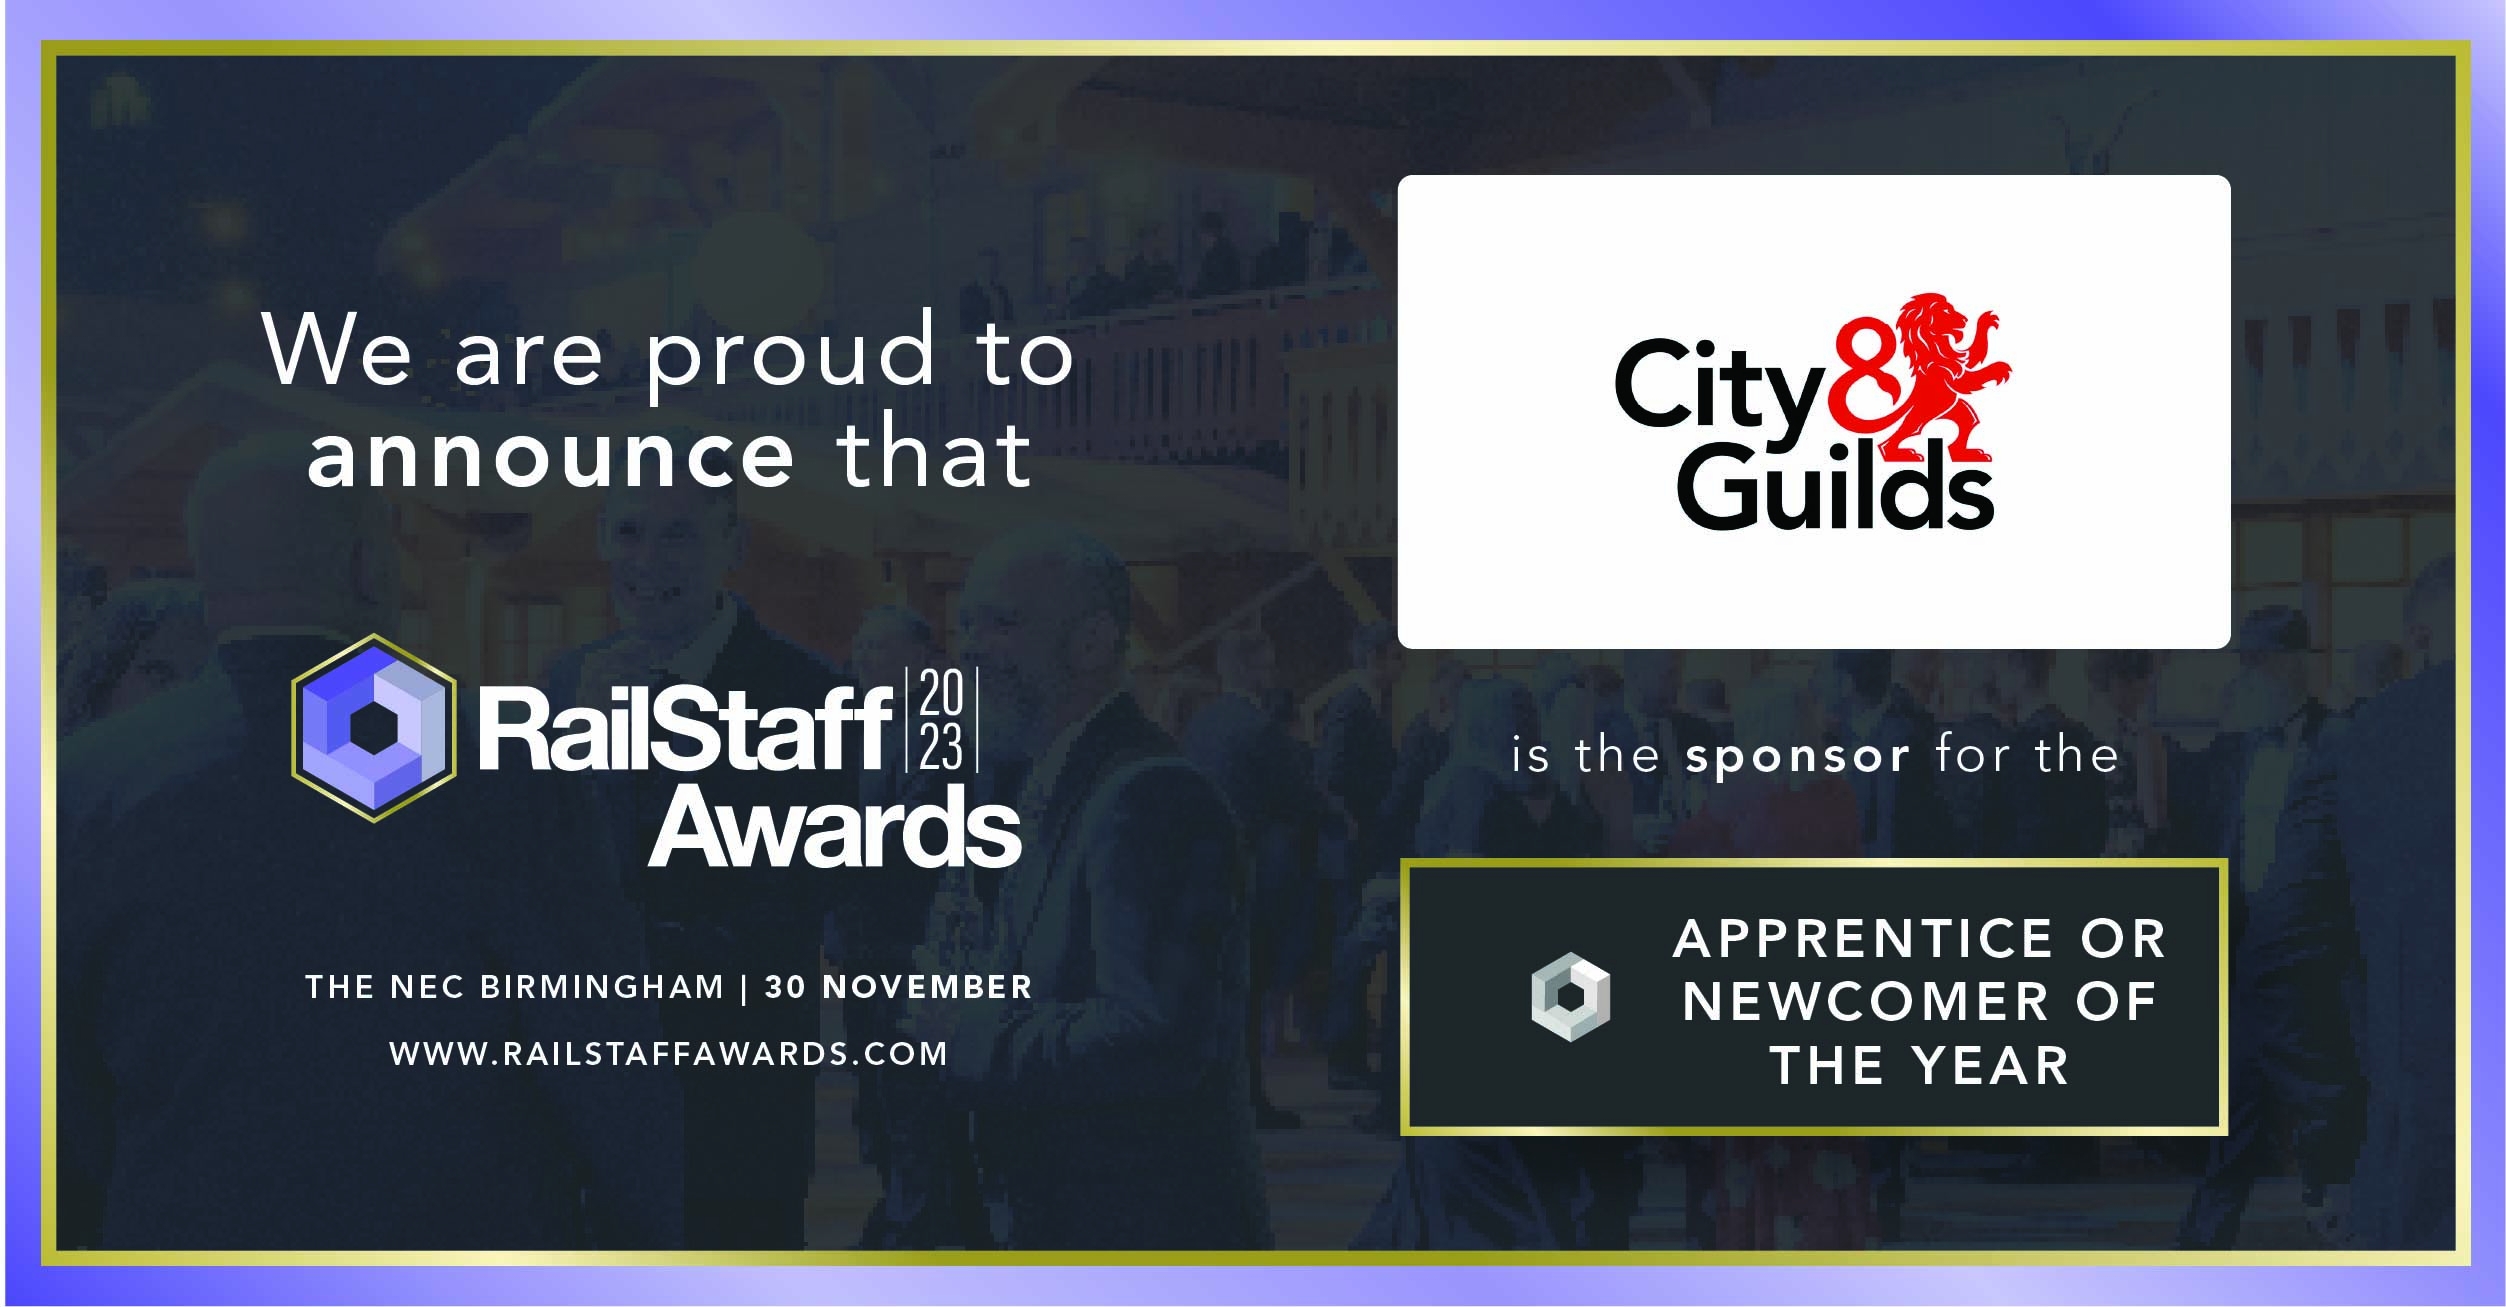 We are proud to announce that City & Guilds are on board as a category sponsor